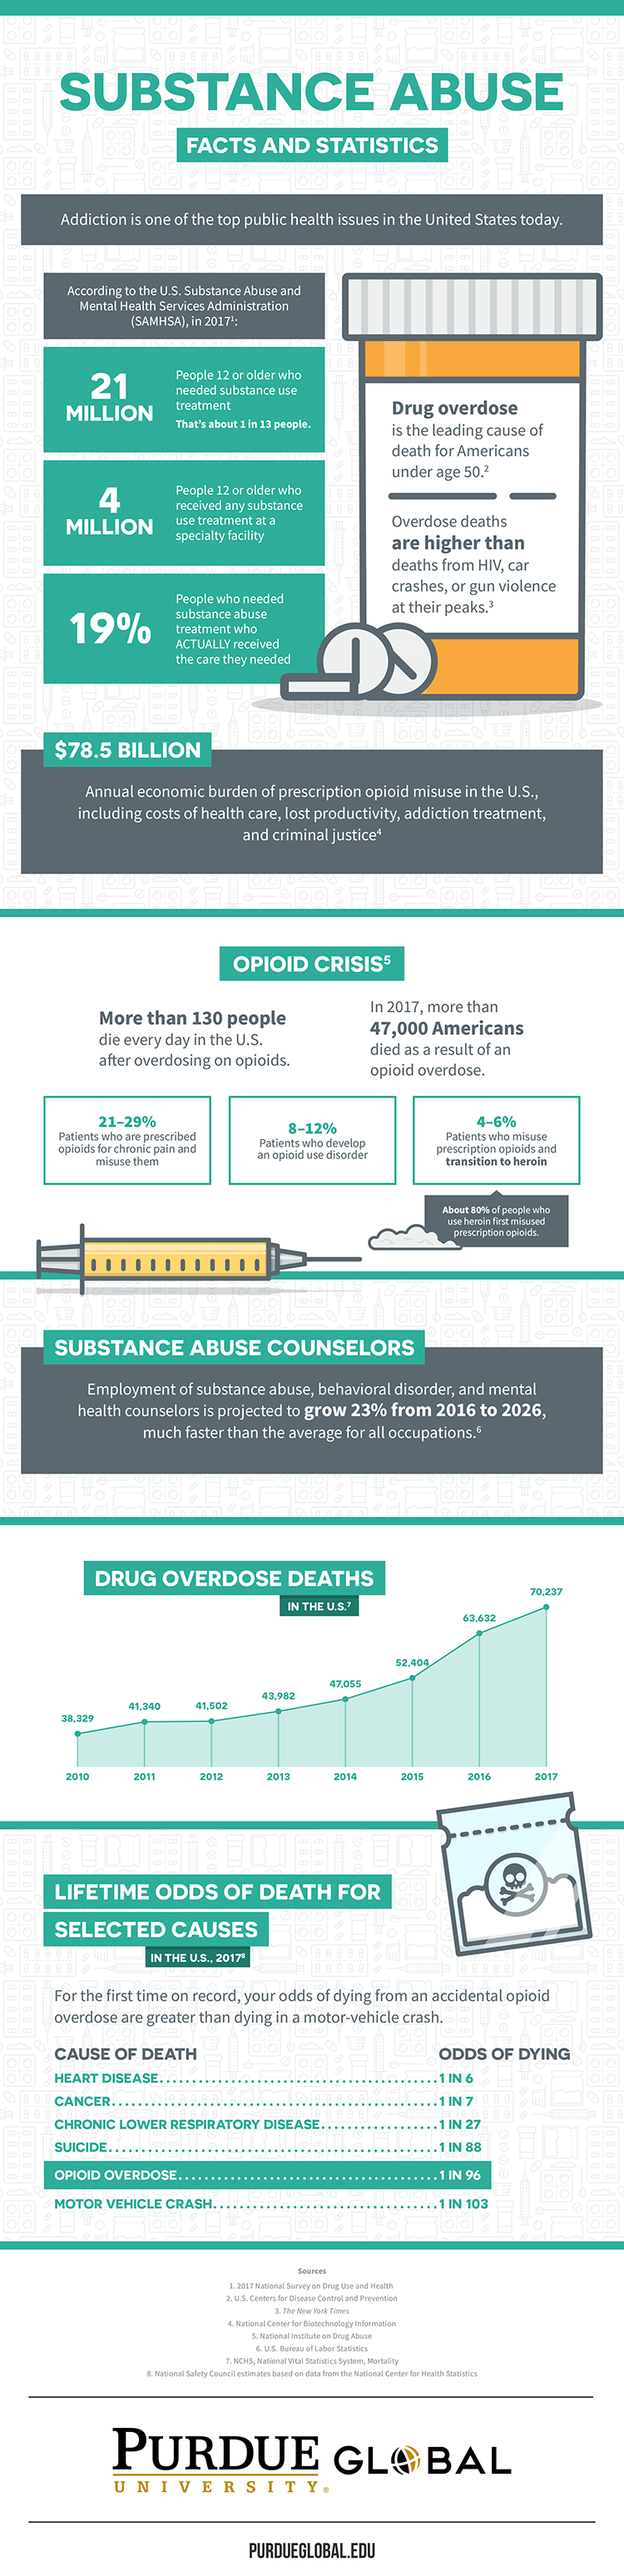 Substance Abuse Facts and Statistics Infographic